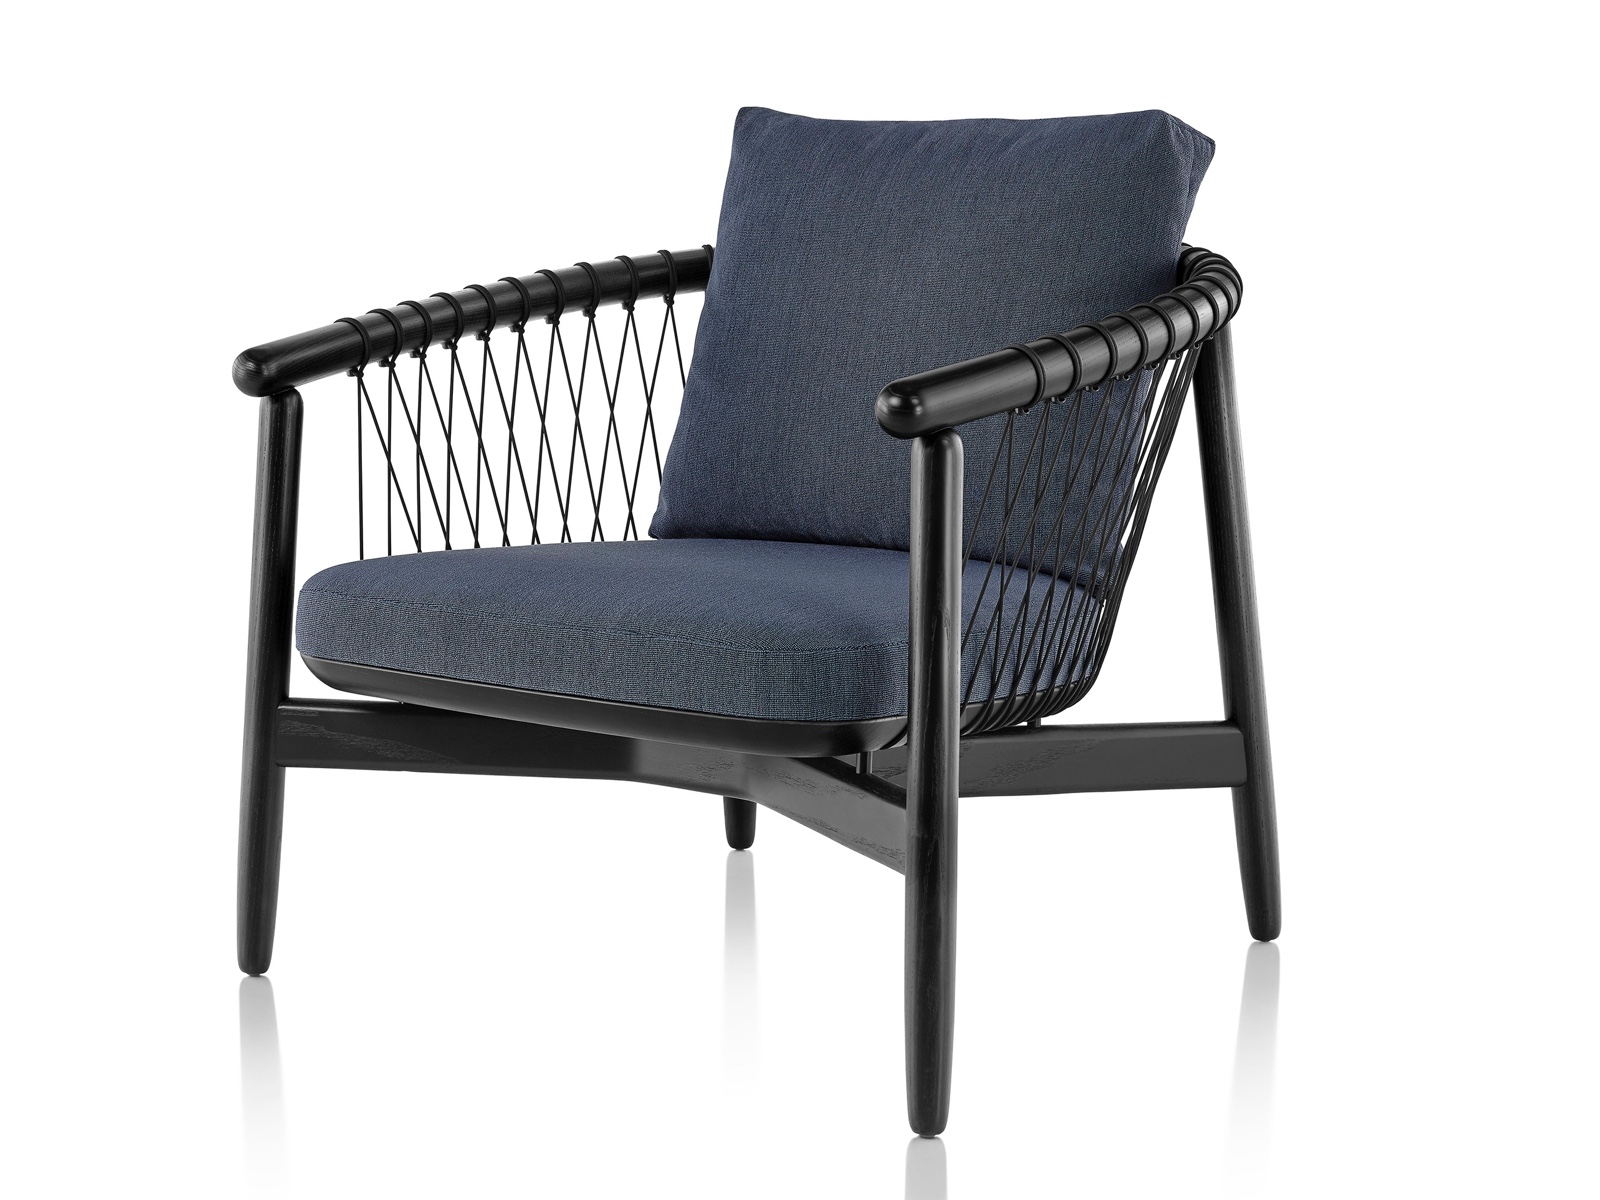 Navy blue upholstered Crosshatch Chair with black wood frame, viewed from the front at an angle.